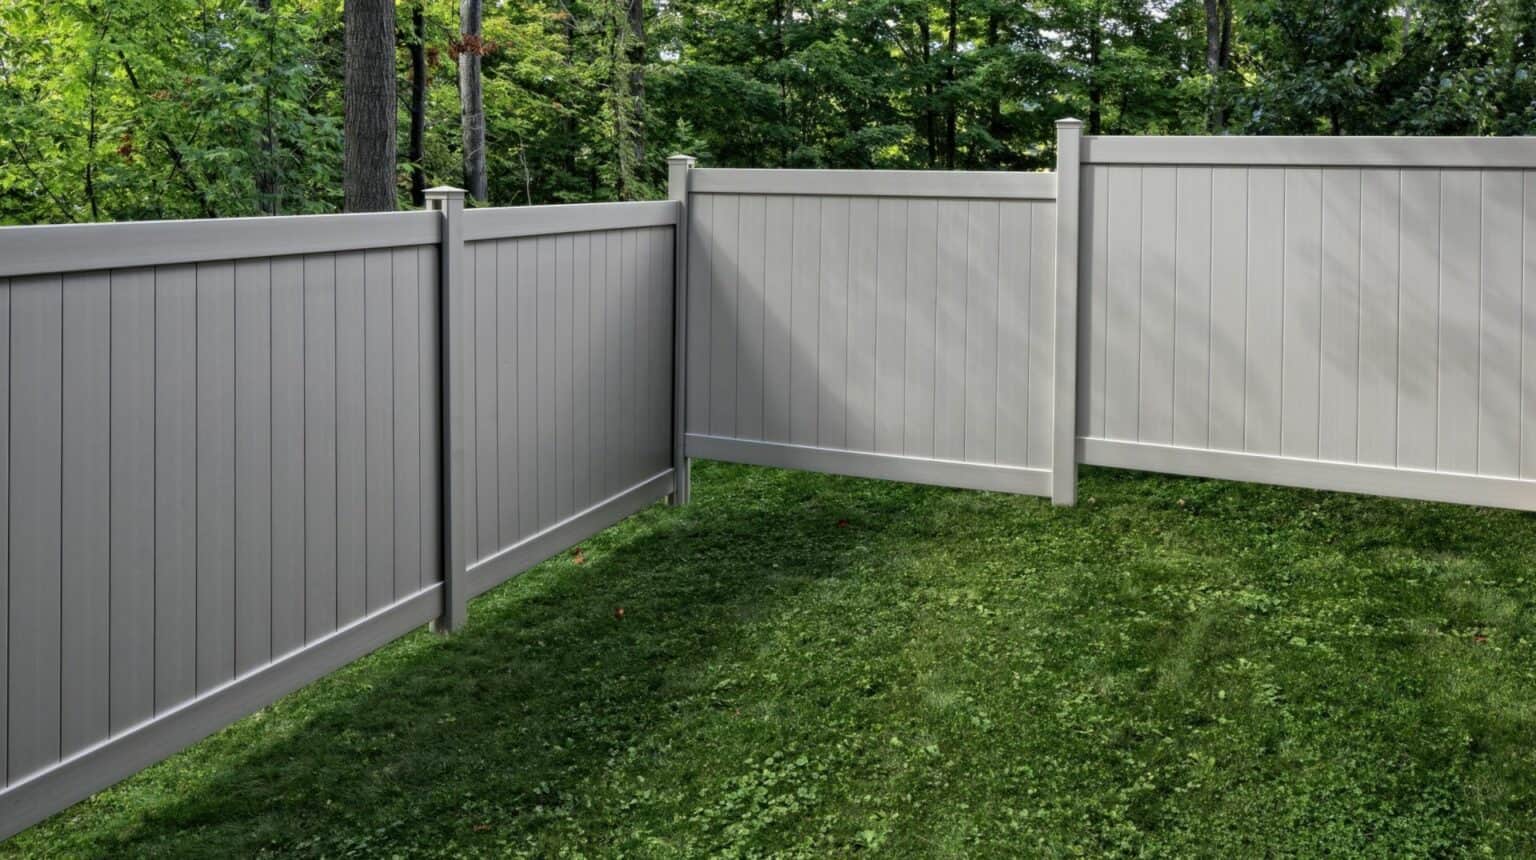 Vinyl clay colored fence in front of lush backyard lawn with dense forest in the background